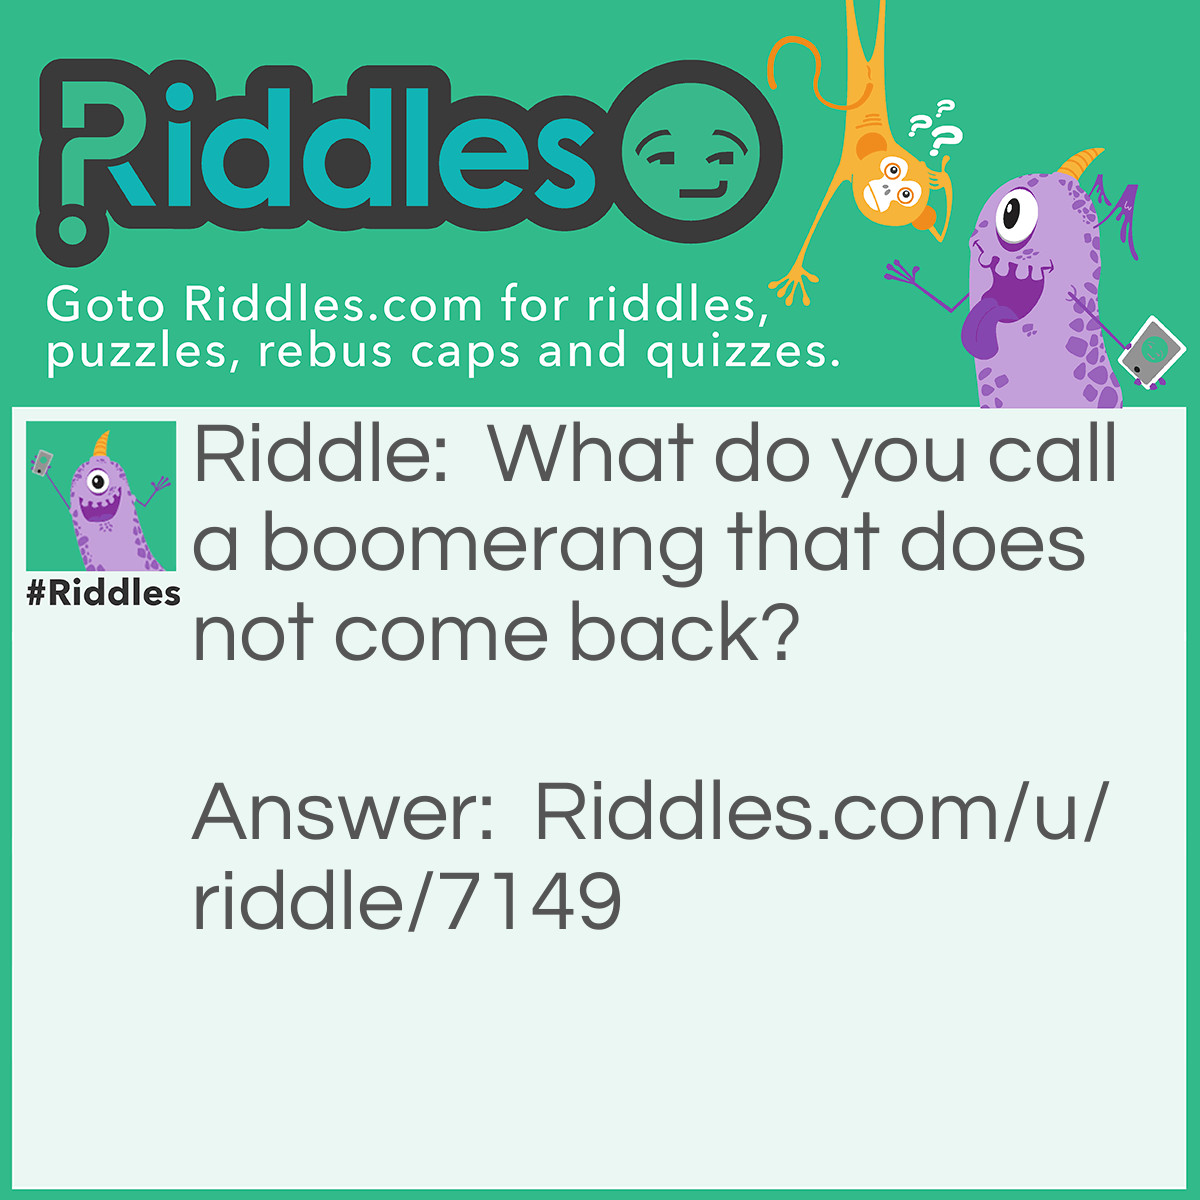 Riddle: What do you call a boomerang that does not come back? Answer: A stick.